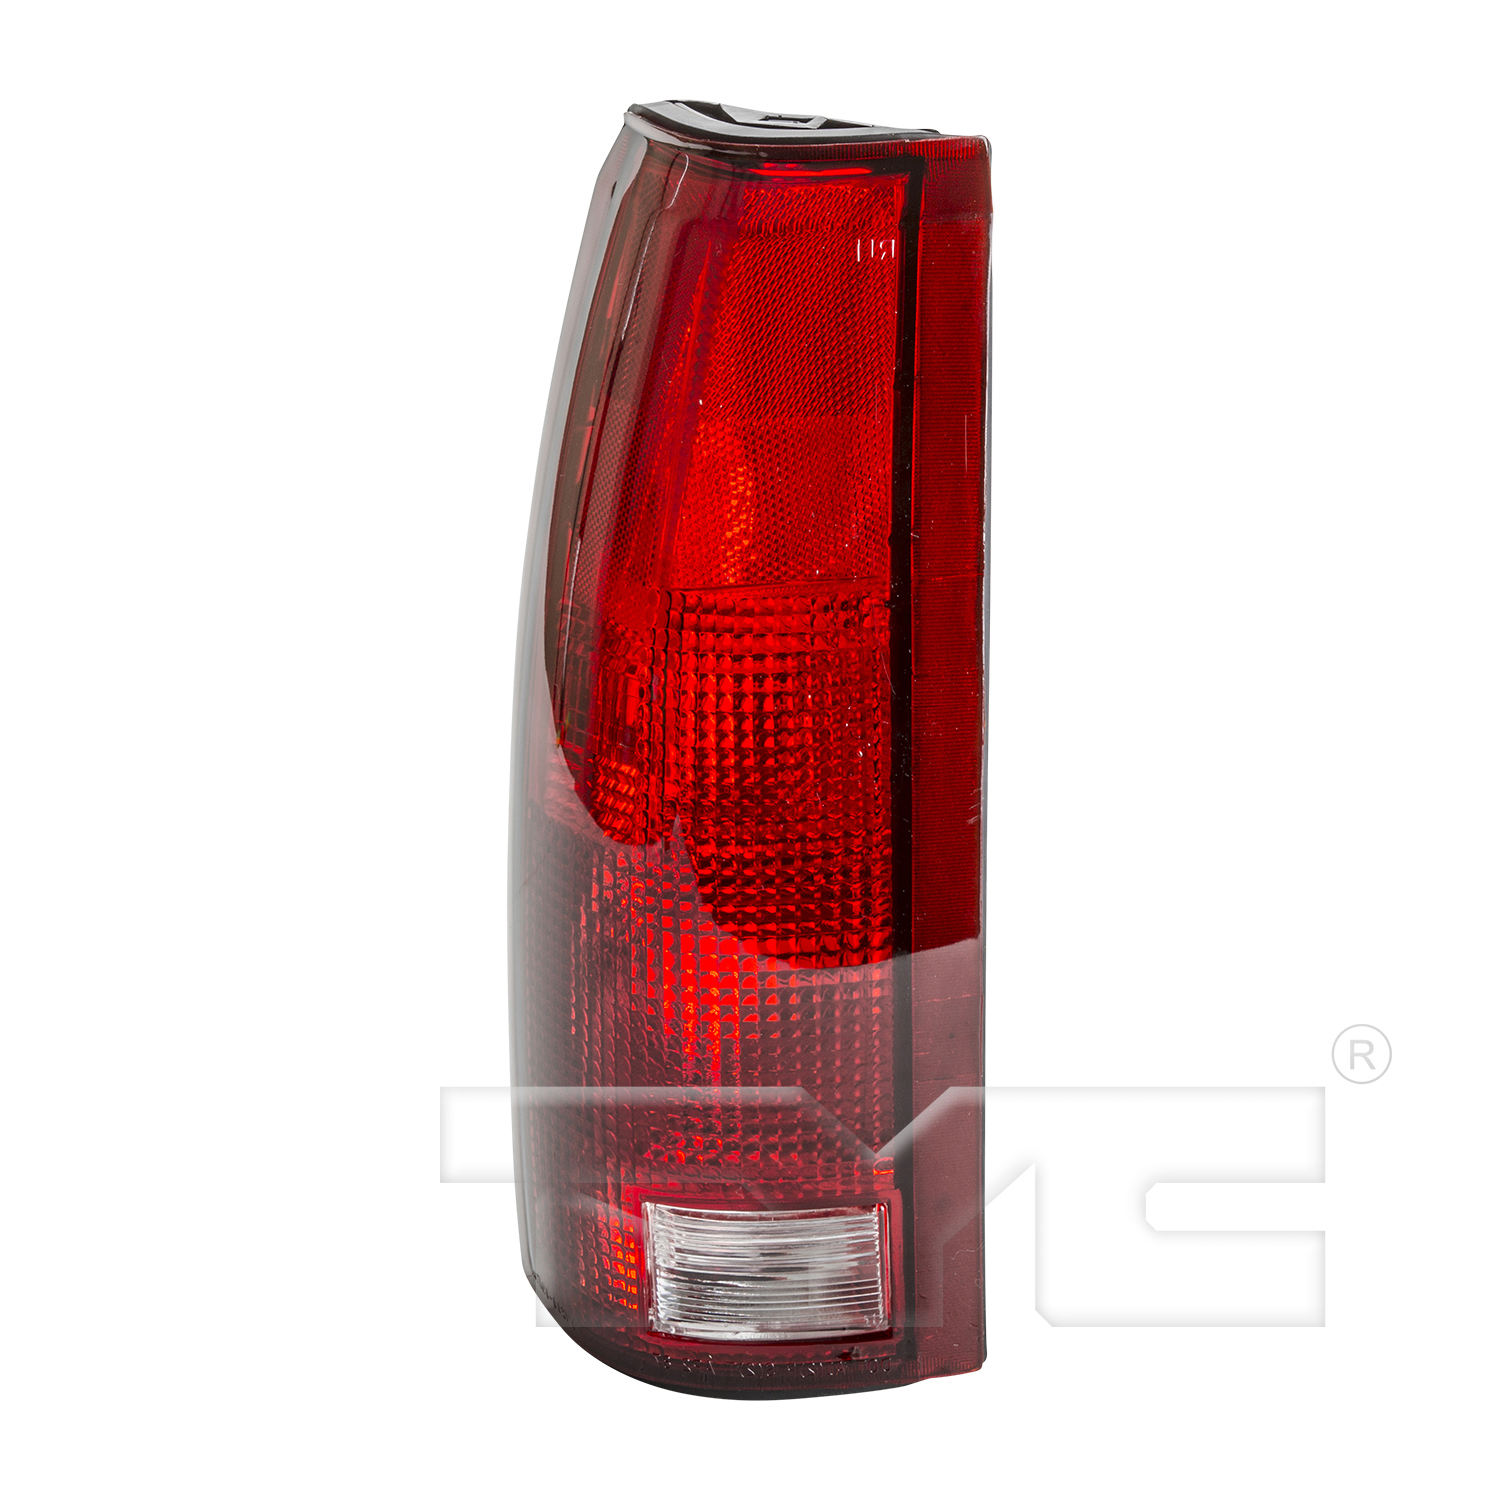 Aftermarket TAILLIGHTS for CHEVROLET - C1500, C1500,88-99,LT Taillamp lens